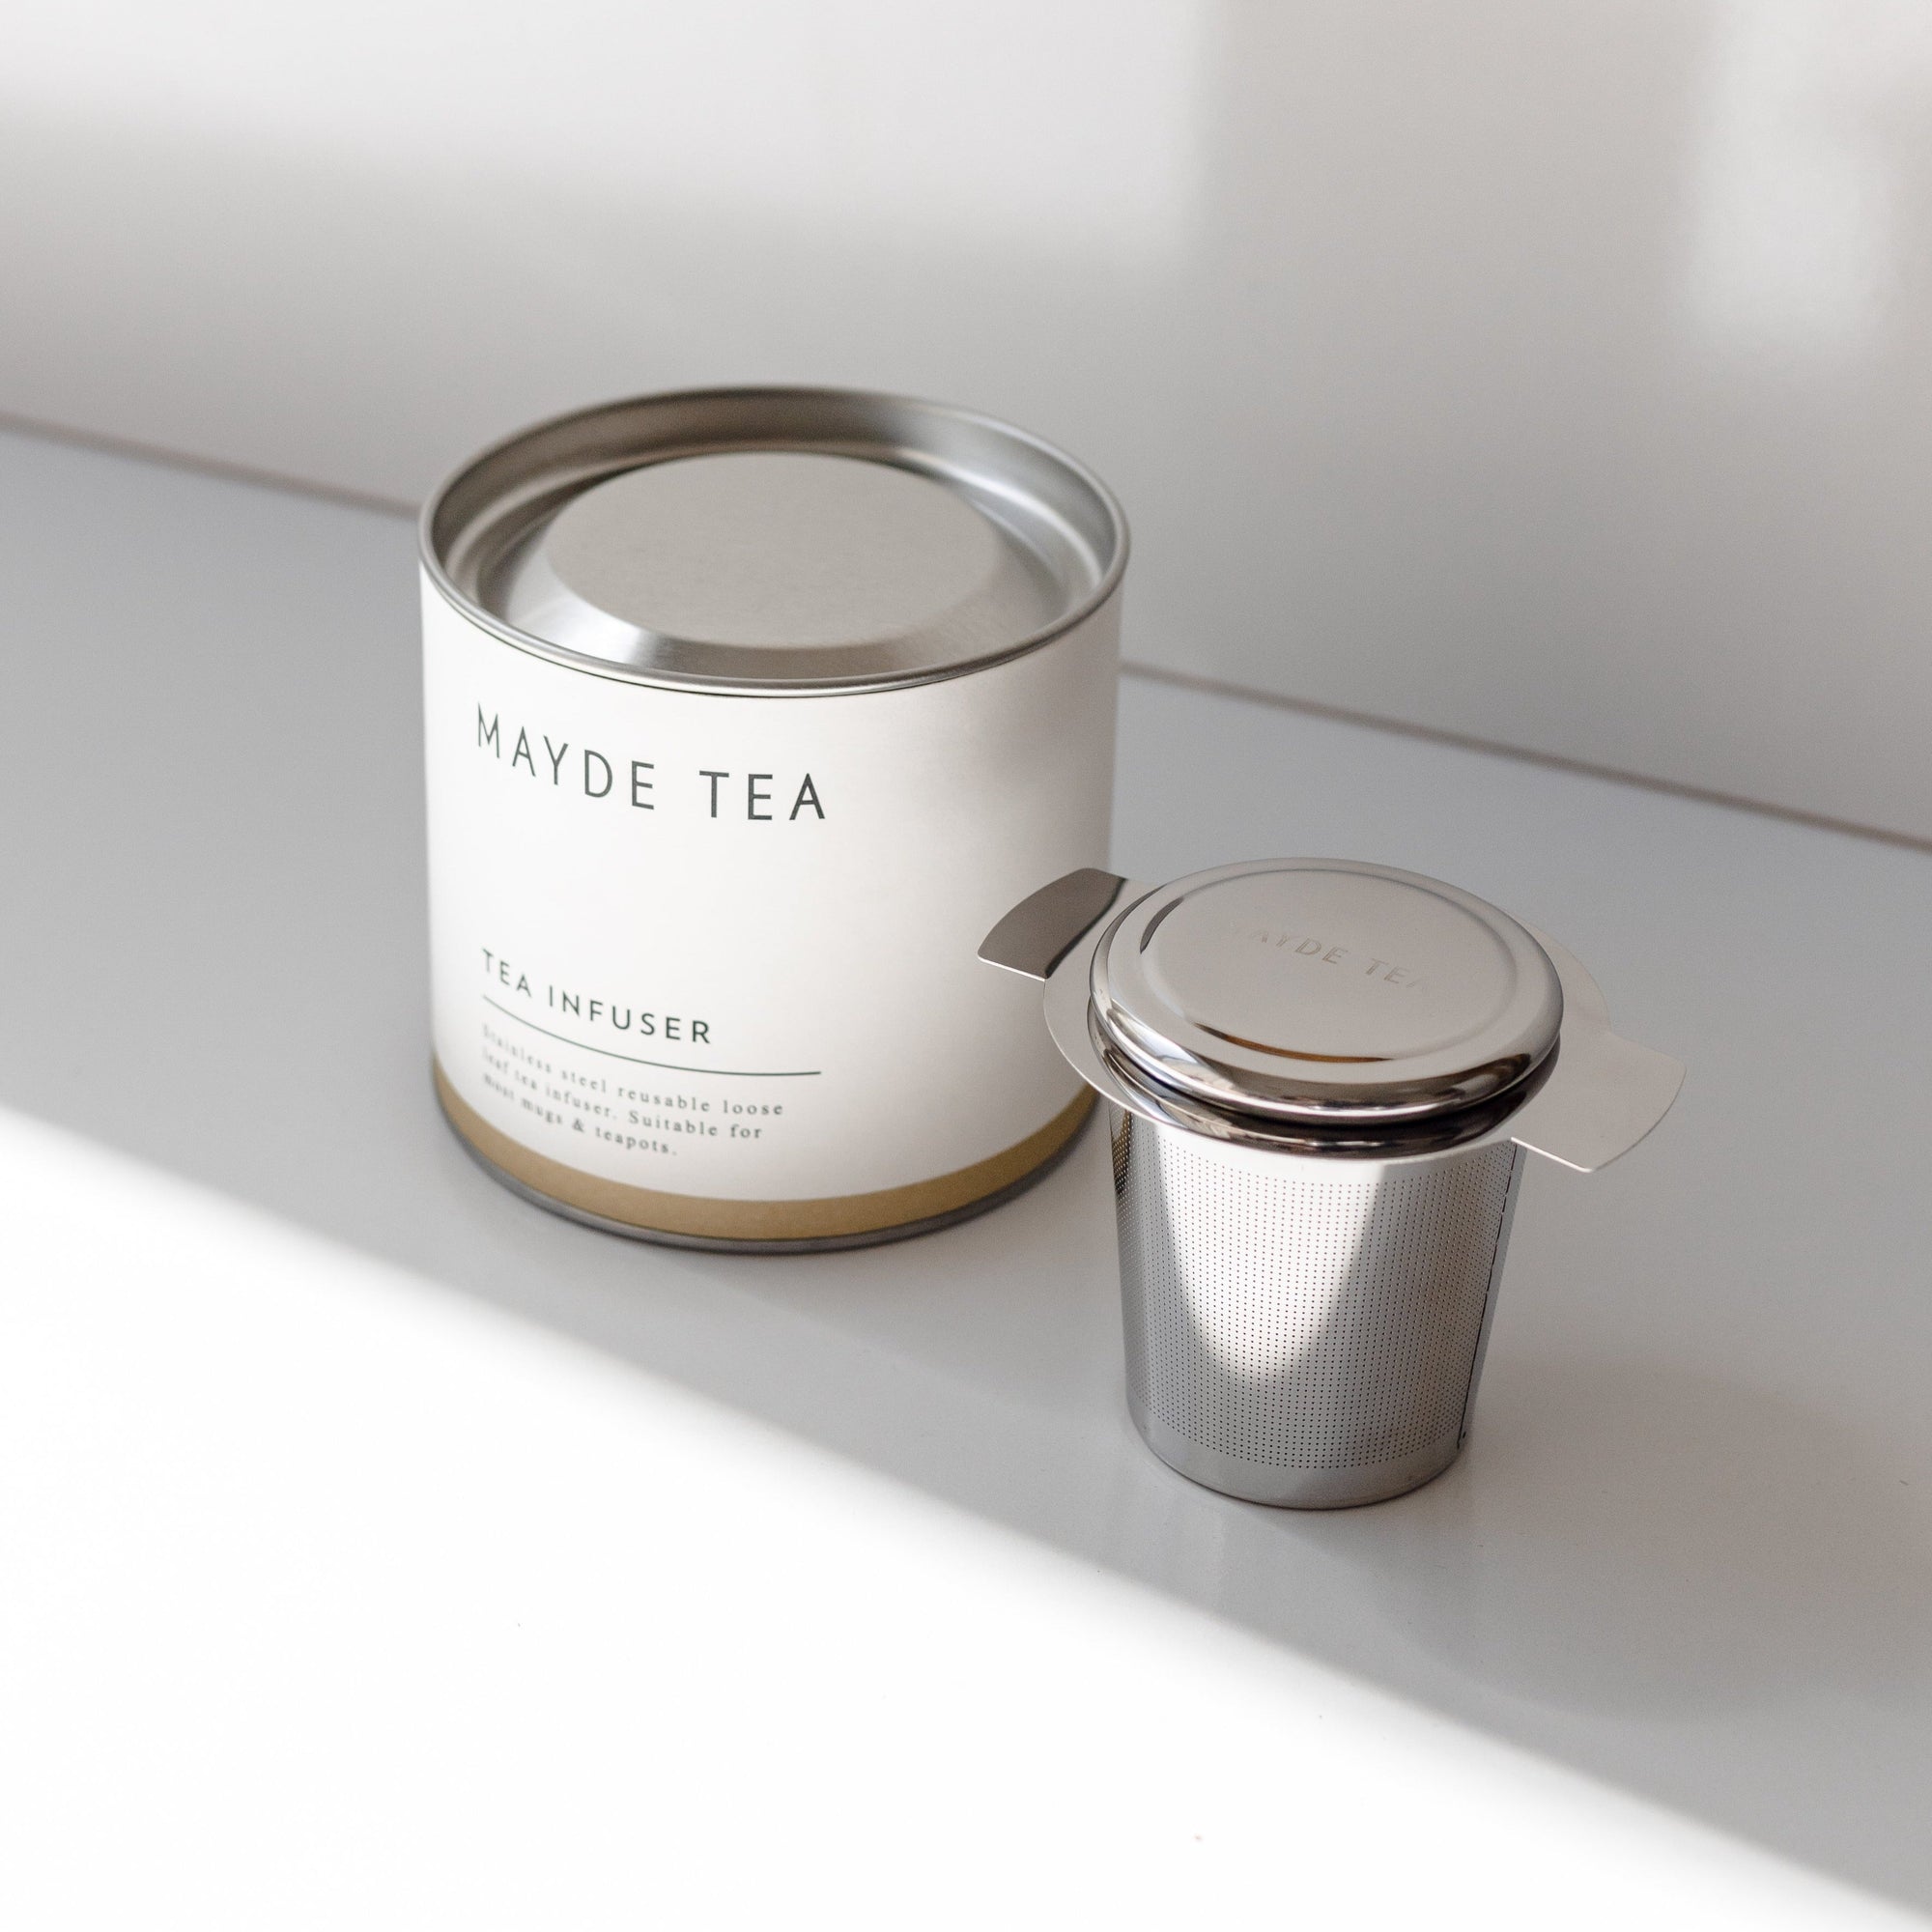 Our tea strainer comes with a lid for a very important purpose- and that is because when you add boiling water to a herbal tea containing volatile oils, (volatile oils are the part of the plant with the medicinal benefit) they can evaporate with the steam.